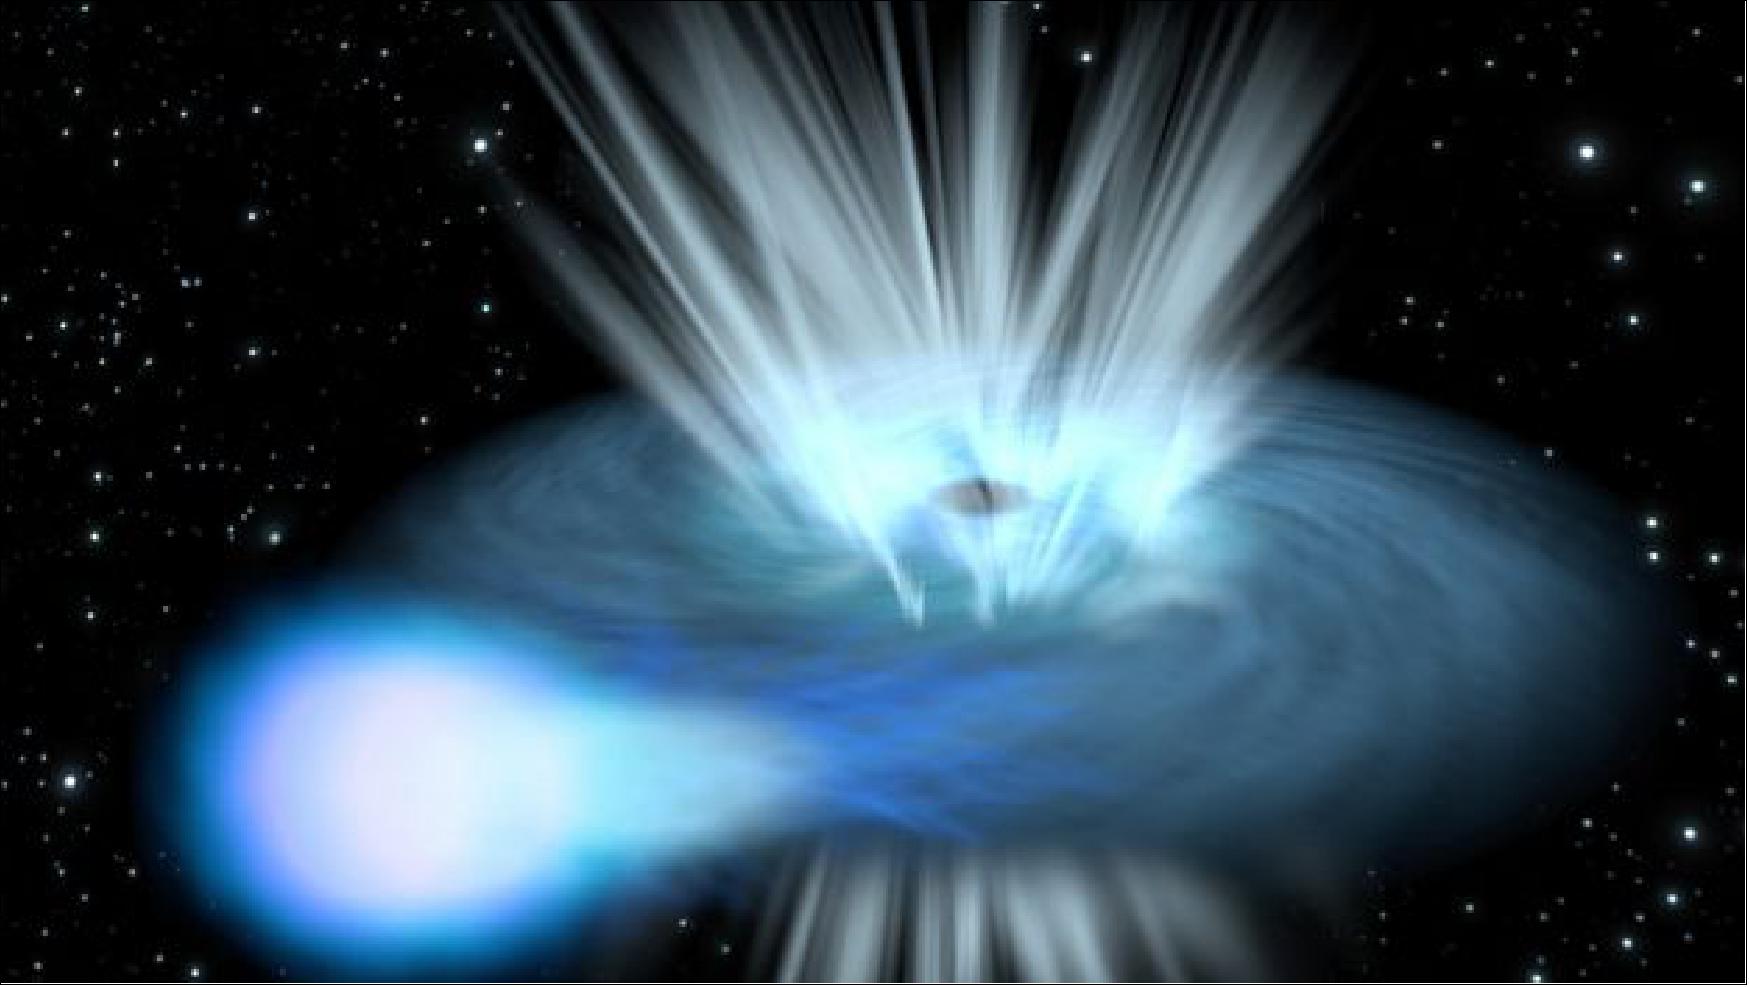 Figure 108: Artist's impression depicting a compact object – either a black hole or a neutron star – feeding on gas from a companion star in a binary system (image credit: ESA, C. Carreau)